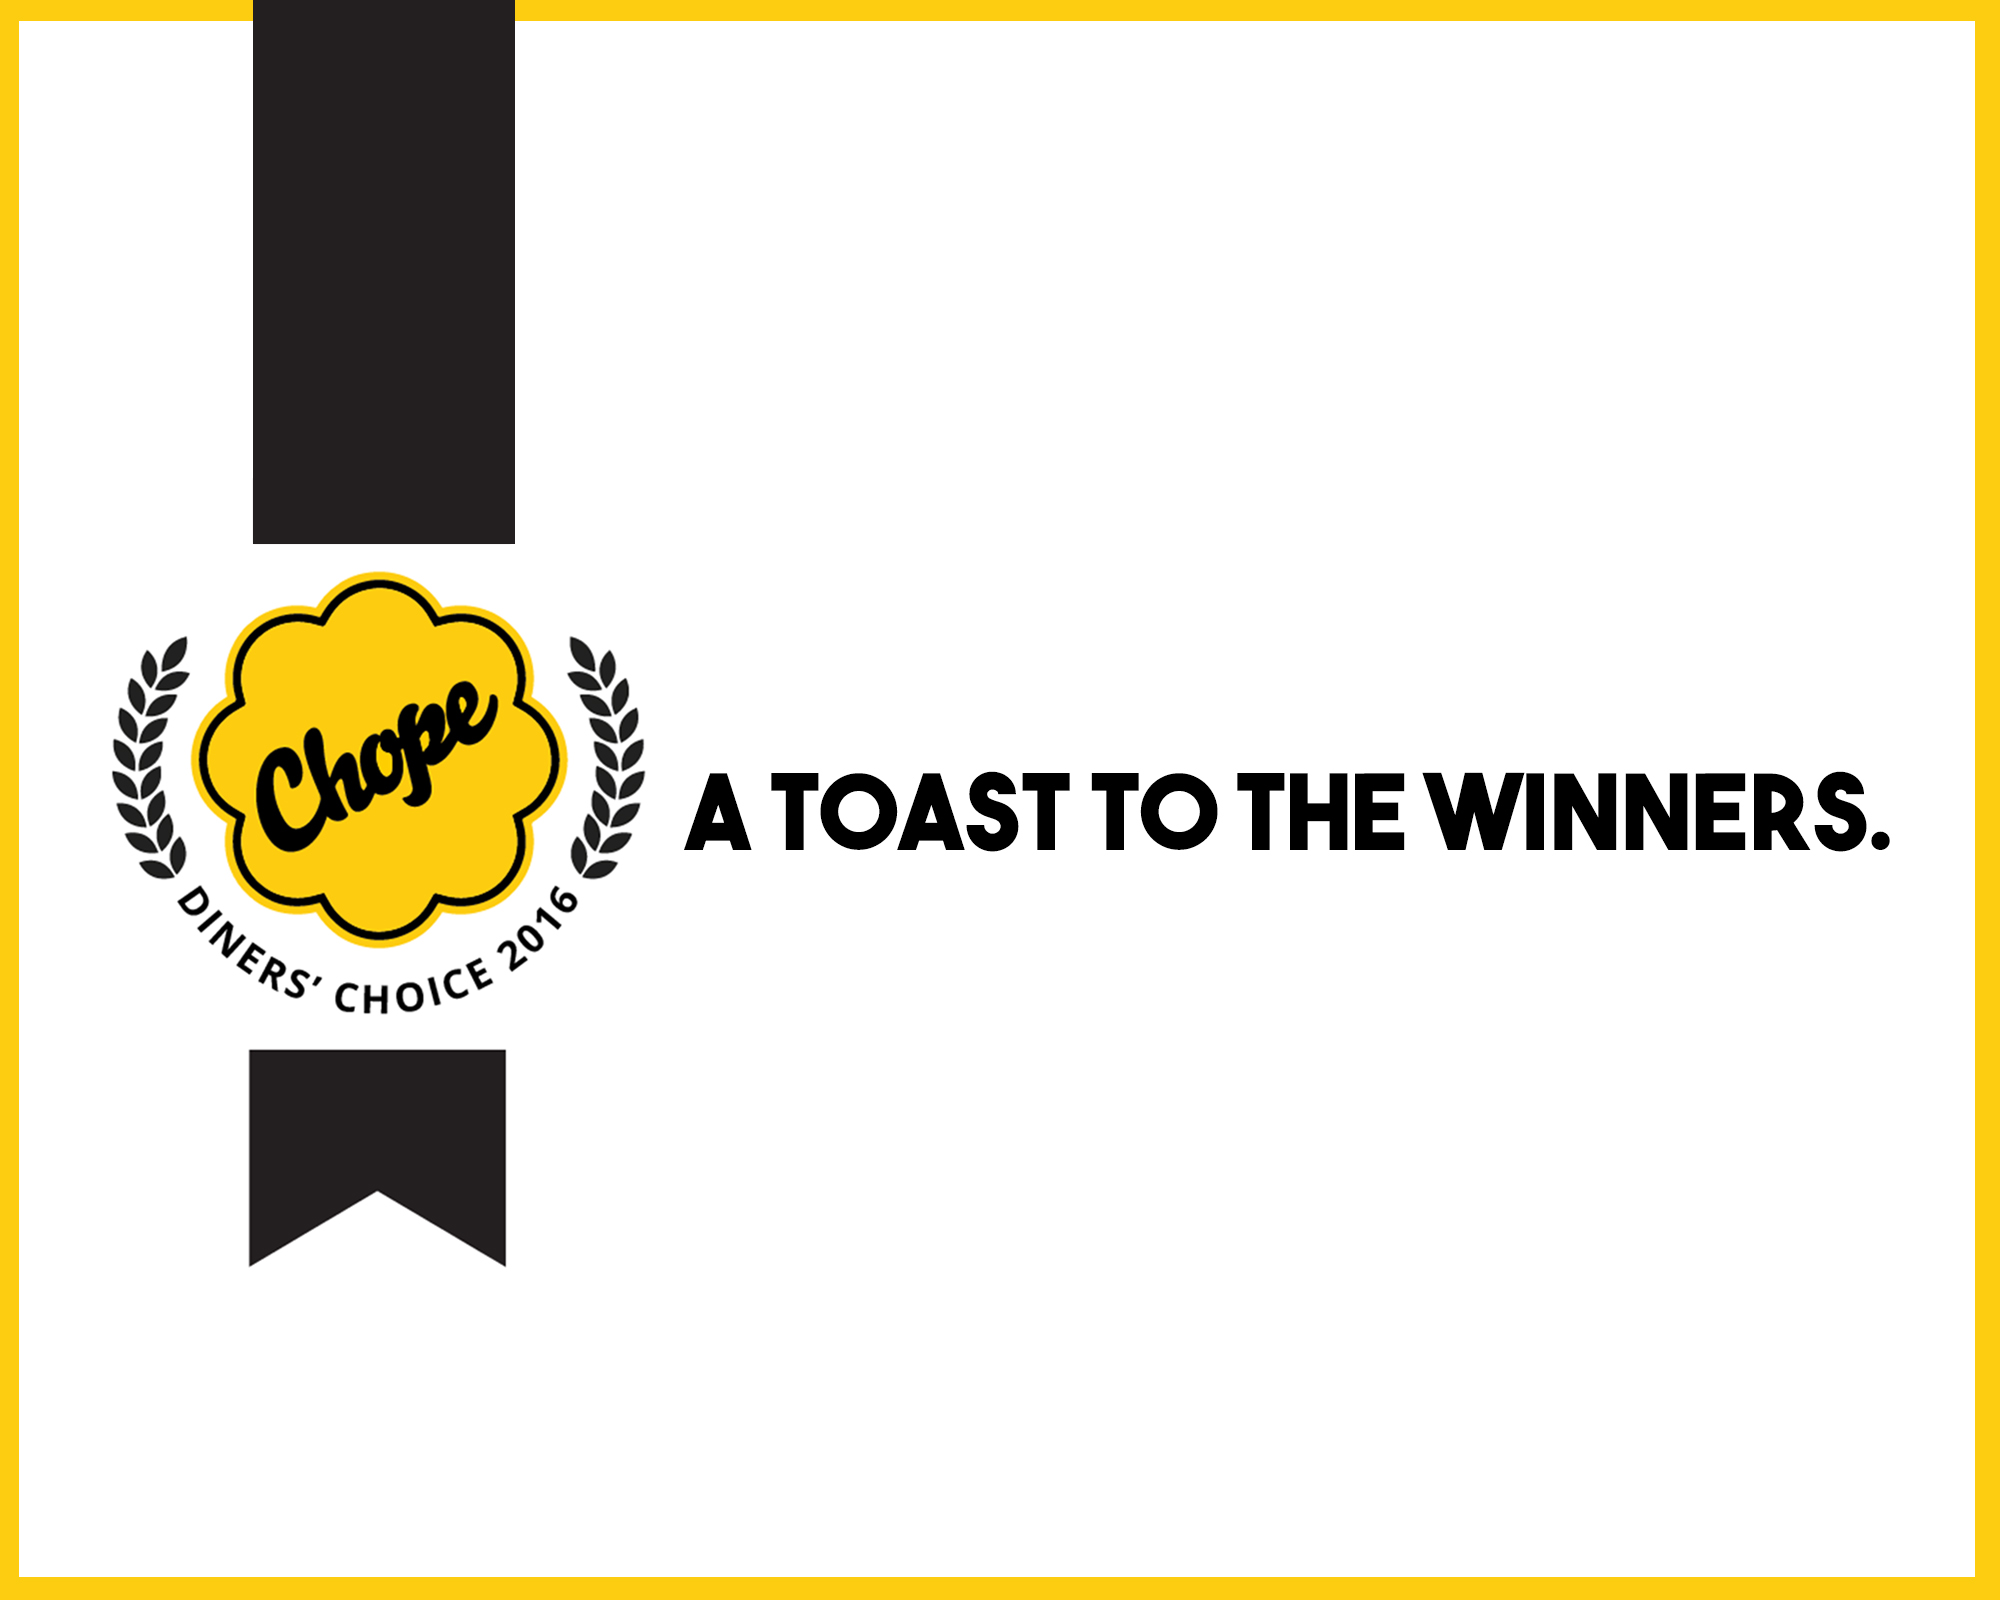 Chope’s Diners’ Choice Awards 2016 – Winners Announced!